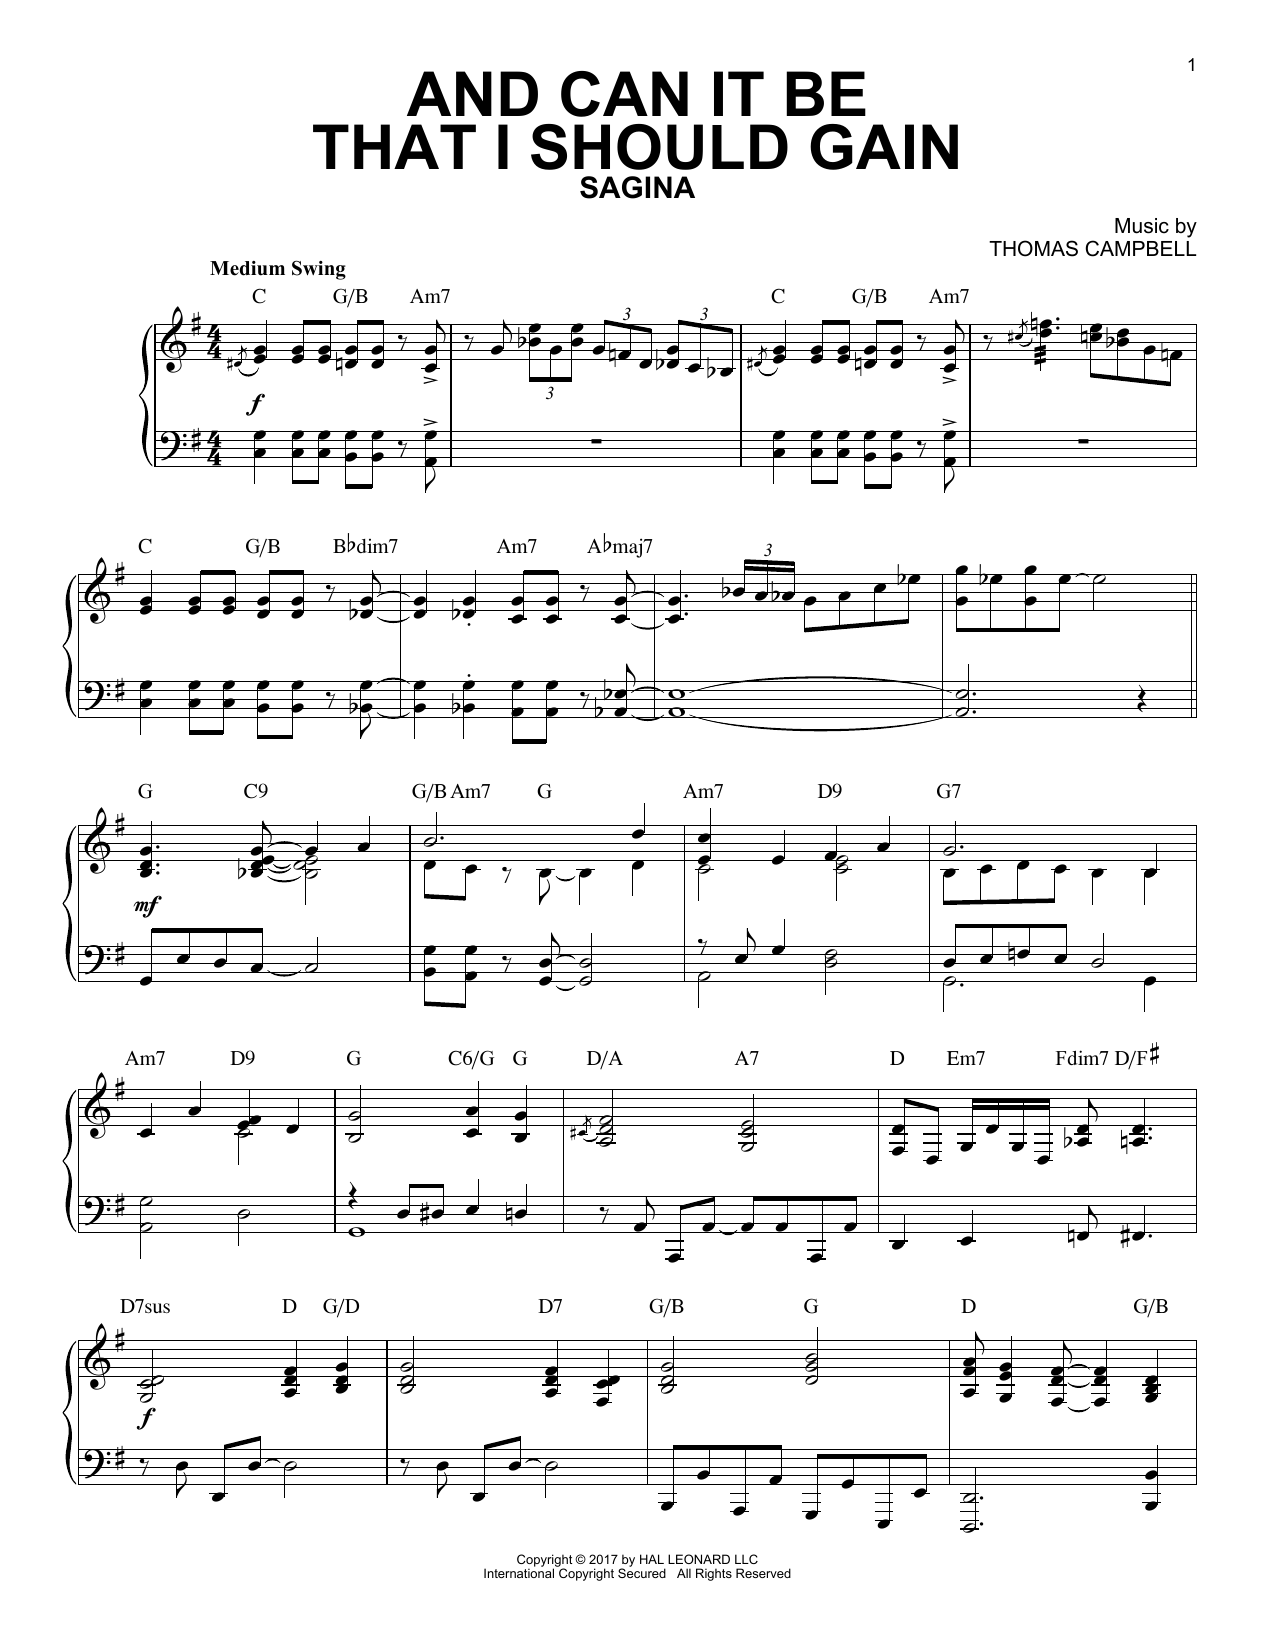 Download Thomas Campbell And Can It Be That I Should Gain [Jazz Sheet Music